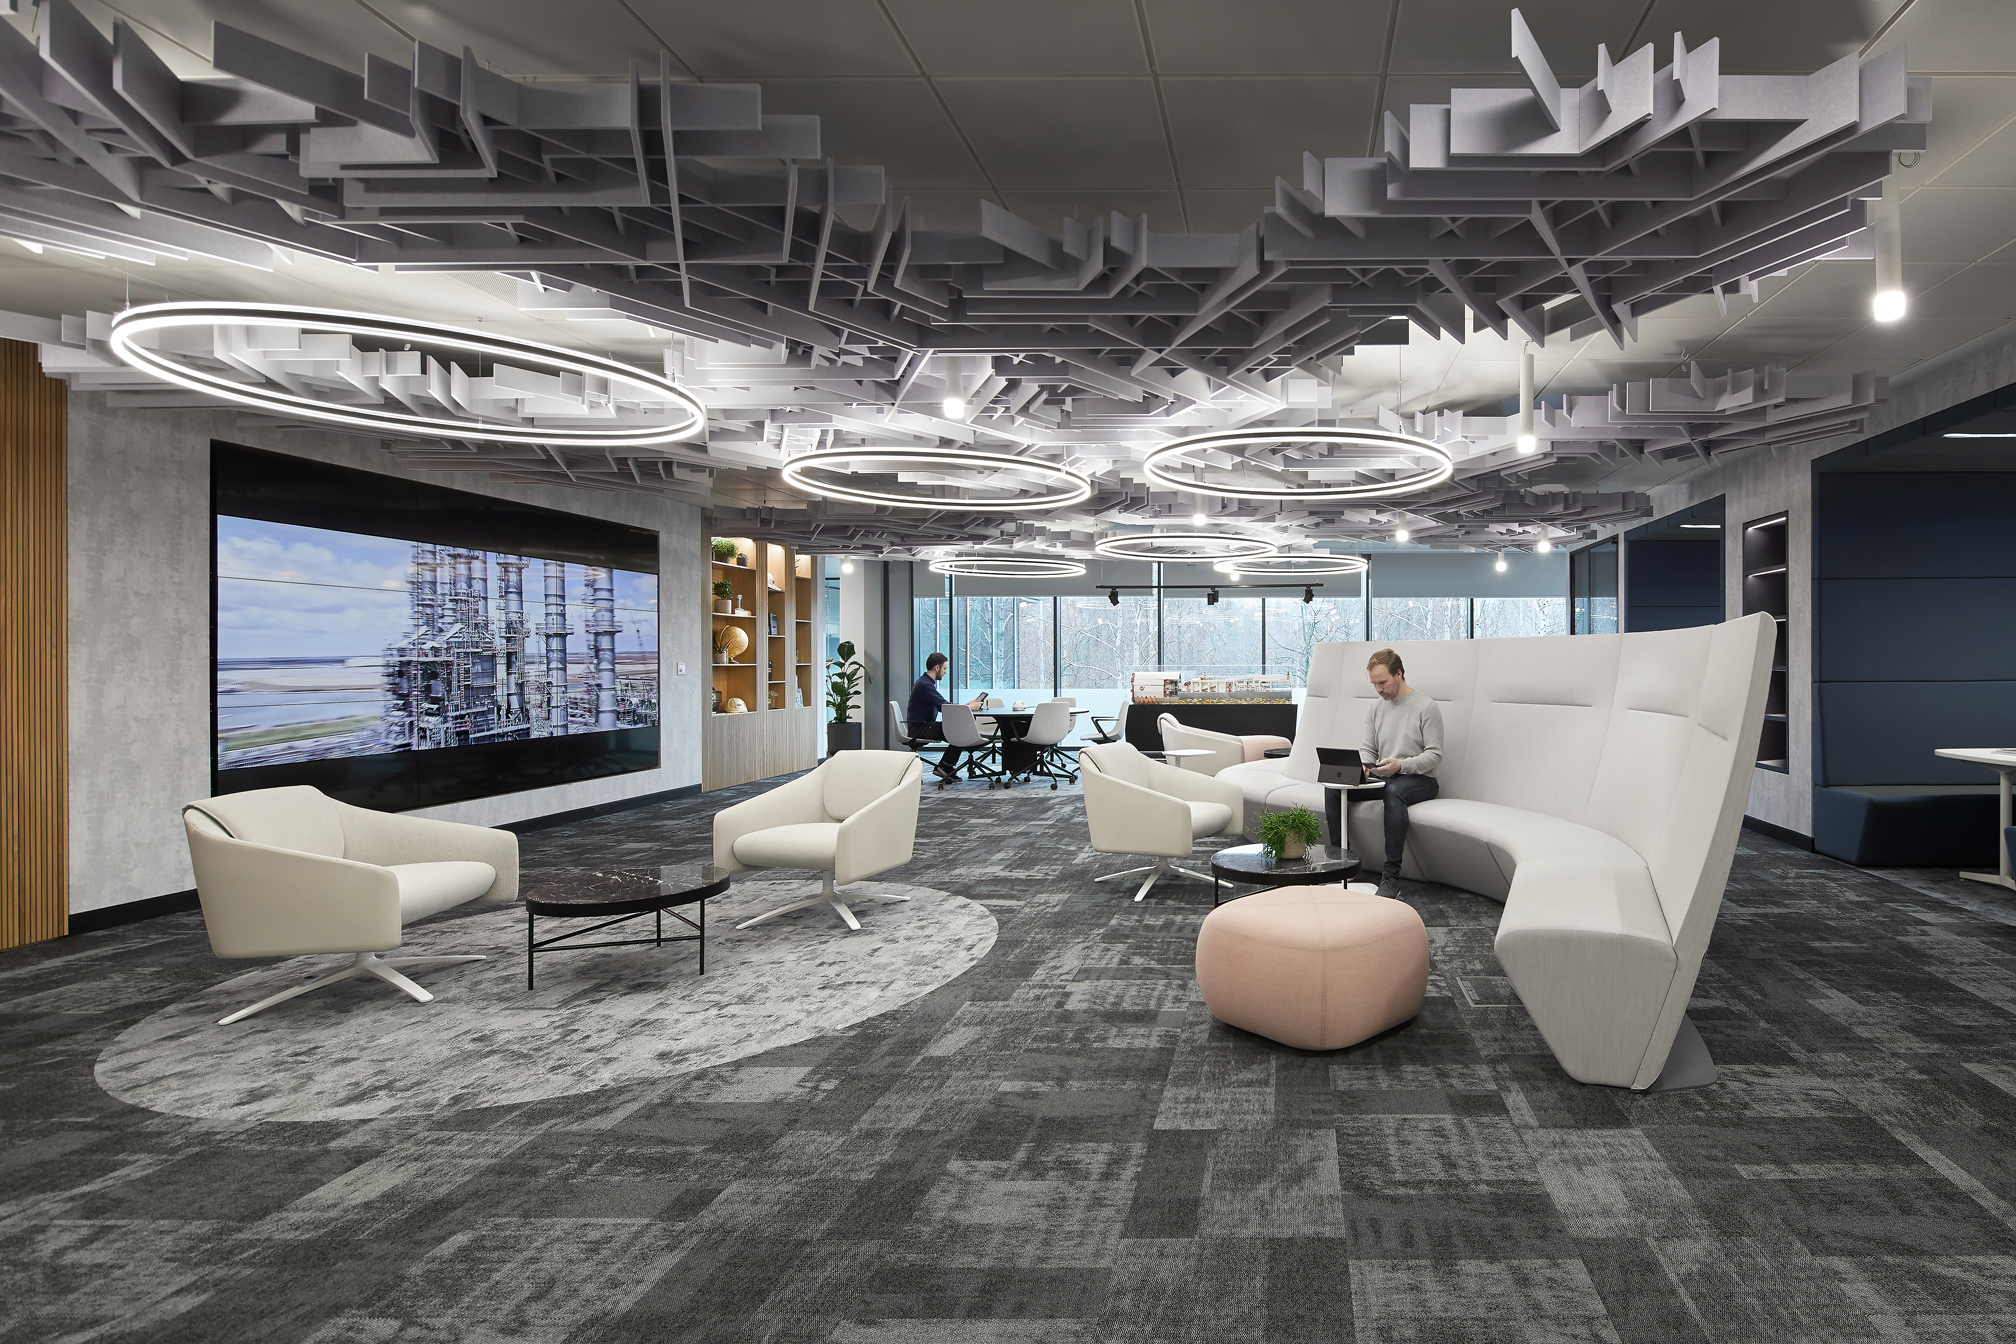 Explora® Halo fittings used in conjunction with Hacel's Chyme pendants in the Bechtel offices in Park Royal, London.